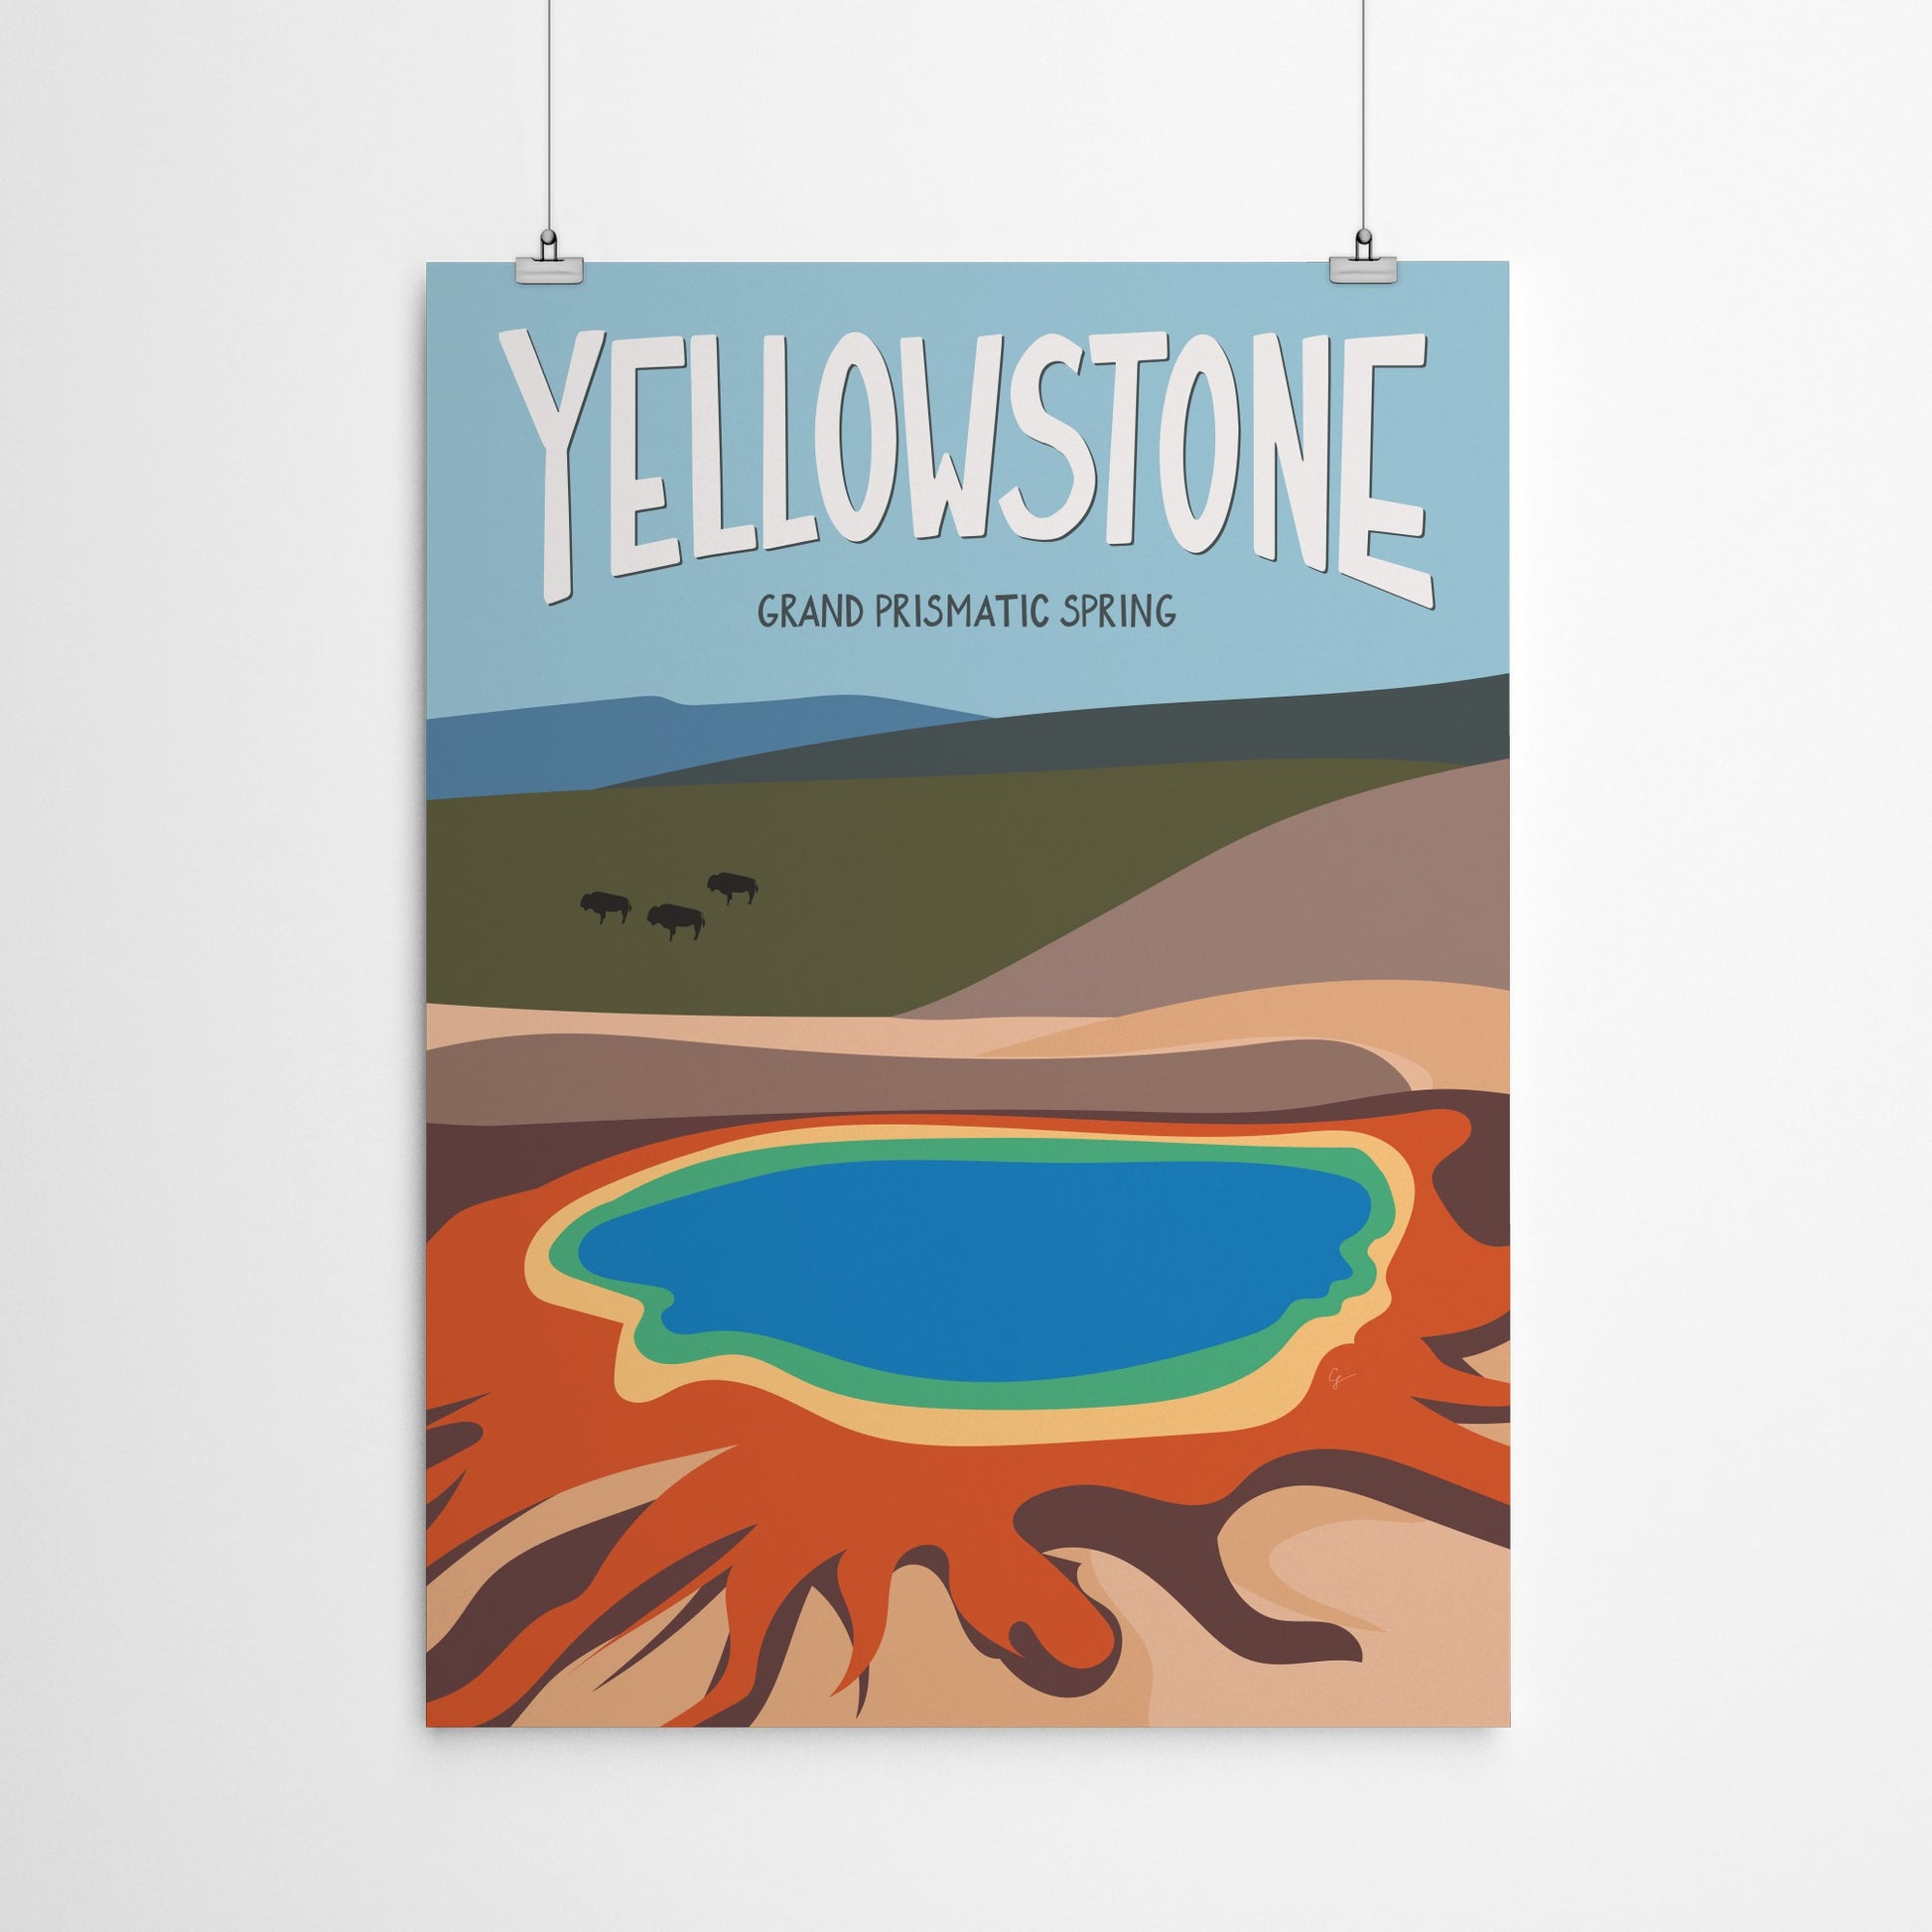 Grand Pristmatic Spring Yellowstone by Lyman Creative Co - Poster - Art Print - Americanflat